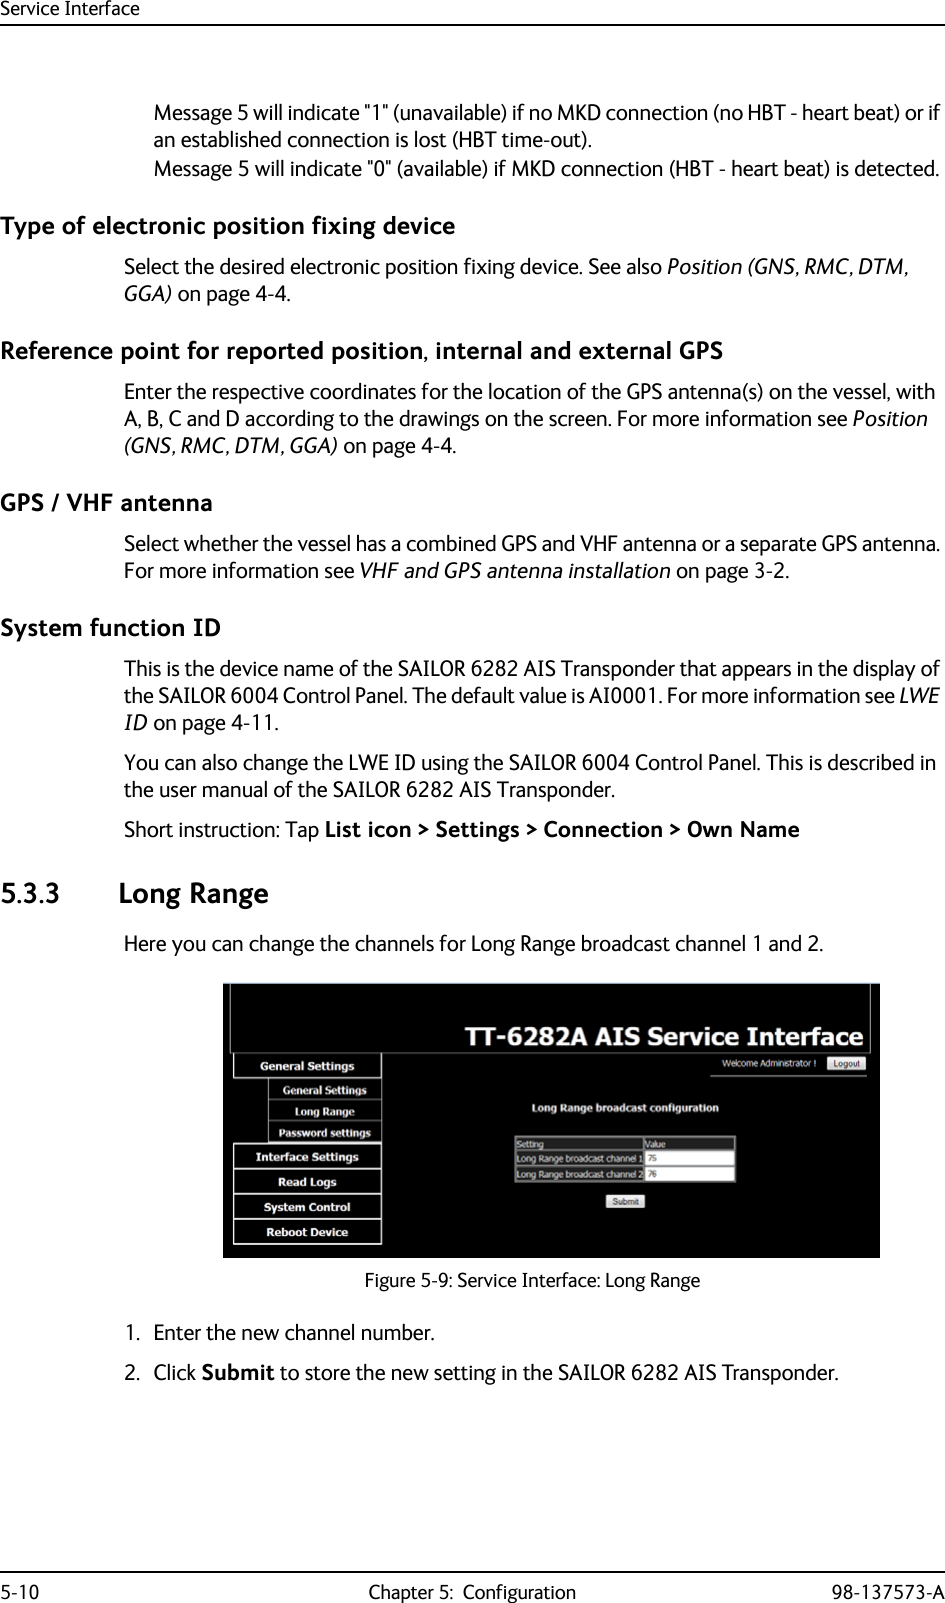 Service Interface5-10 Chapter 5:  Configuration 98-137573-AMessage 5 will indicate &quot;1&quot; (unavailable) if no MKD connection (no HBT - heart beat) or if an established connection is lost (HBT time-out).Message 5 will indicate &quot;0&quot; (available) if MKD connection (HBT - heart beat) is detected.Type of electronic position fixing deviceSelect the desired electronic position fixing device. See also Position (GNS, RMC, DTM, GGA) on page 4-4. Reference point for reported position, internal and external GPSEnter the respective coordinates for the location of the GPS antenna(s) on the vessel, with A, B, C and D according to the drawings on the screen. For more information see Position (GNS, RMC, DTM, GGA) on page 4-4.GPS / VHF antennaSelect whether the vessel has a combined GPS and VHF antenna or a separate GPS antenna. For more information see VHF and GPS antenna installation on page 3-2.System function IDThis is the device name of the SAILOR 6282 AIS Transponder that appears in the display of the SAILOR 6004 Control Panel. The default value is AI0001. For more information see LWE ID on page 4-11. You can also change the LWE ID using the SAILOR 6004 Control Panel. This is described in the user manual of the SAILOR 6282 AIS Transponder.Short instruction: Tap List icon &gt; Settings &gt; Connection &gt; Own Name5.3.3 Long RangeHere you can change the channels for Long Range broadcast channel 1 and 2. 1. Enter the new channel number.2. Click Submit to store the new setting in the SAILOR 6282 AIS Transponder.Figure 5-9: Service Interface: Long Range